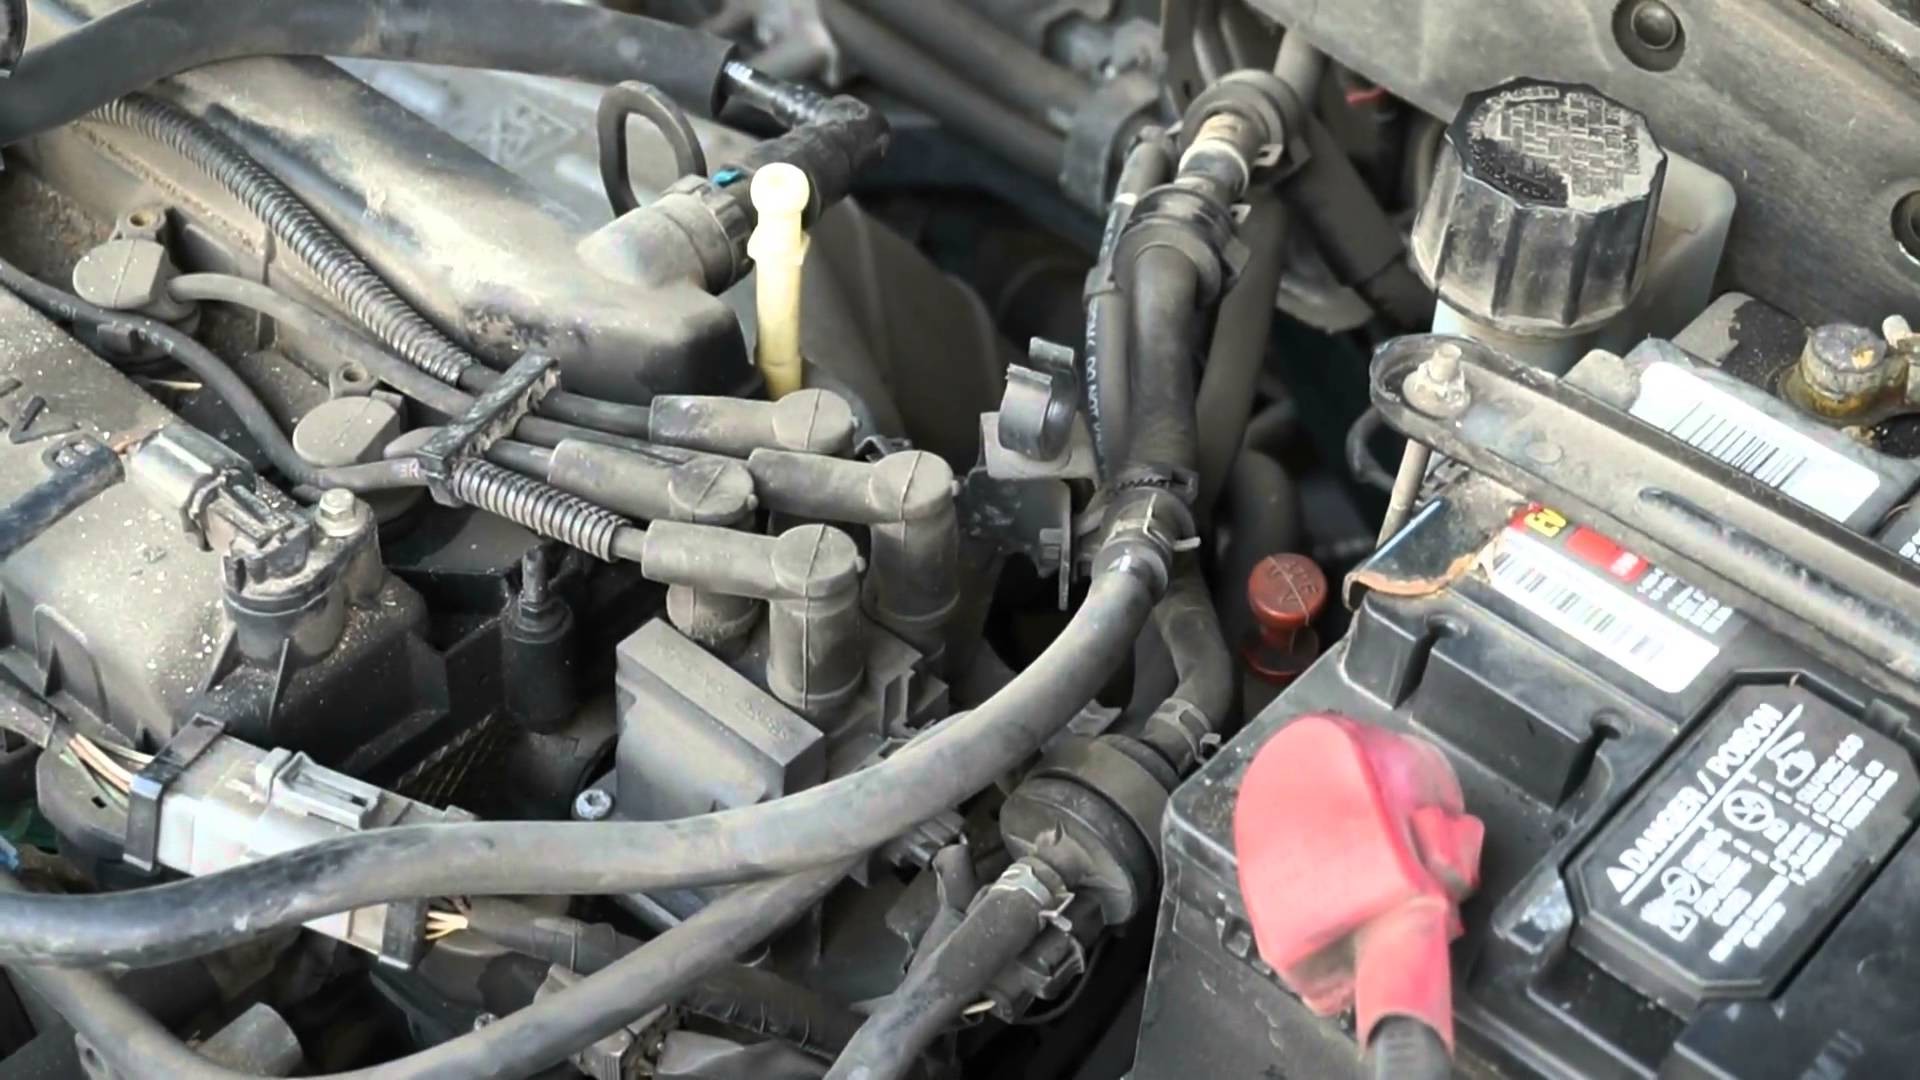 Diagram Of Car Coolant System How to Replace A Coolant Temperature Sensor On A 2005 Mazda 6 Of Diagram Of Car Coolant System